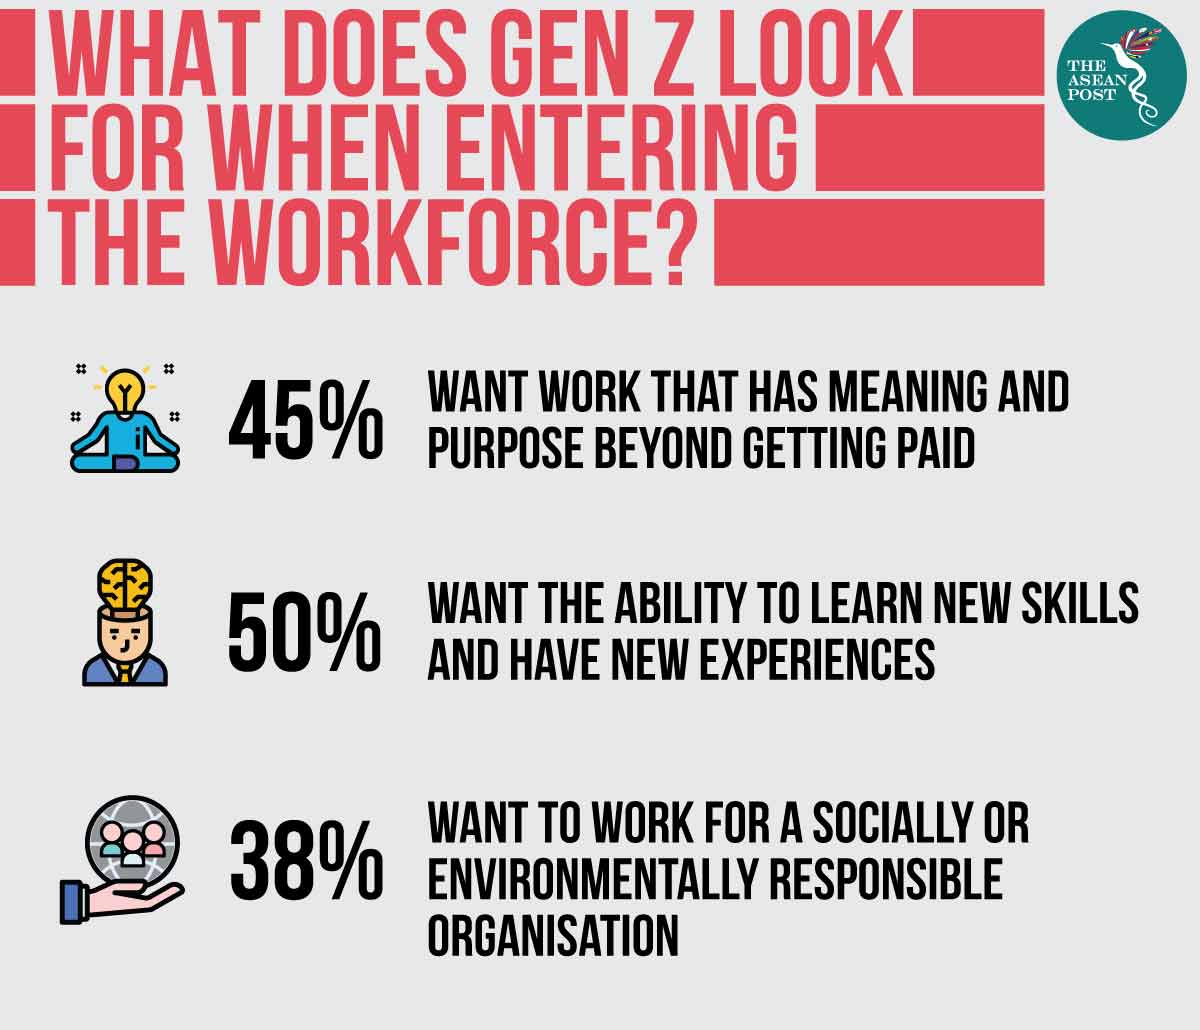 What does Gen Z look for when looking for work?